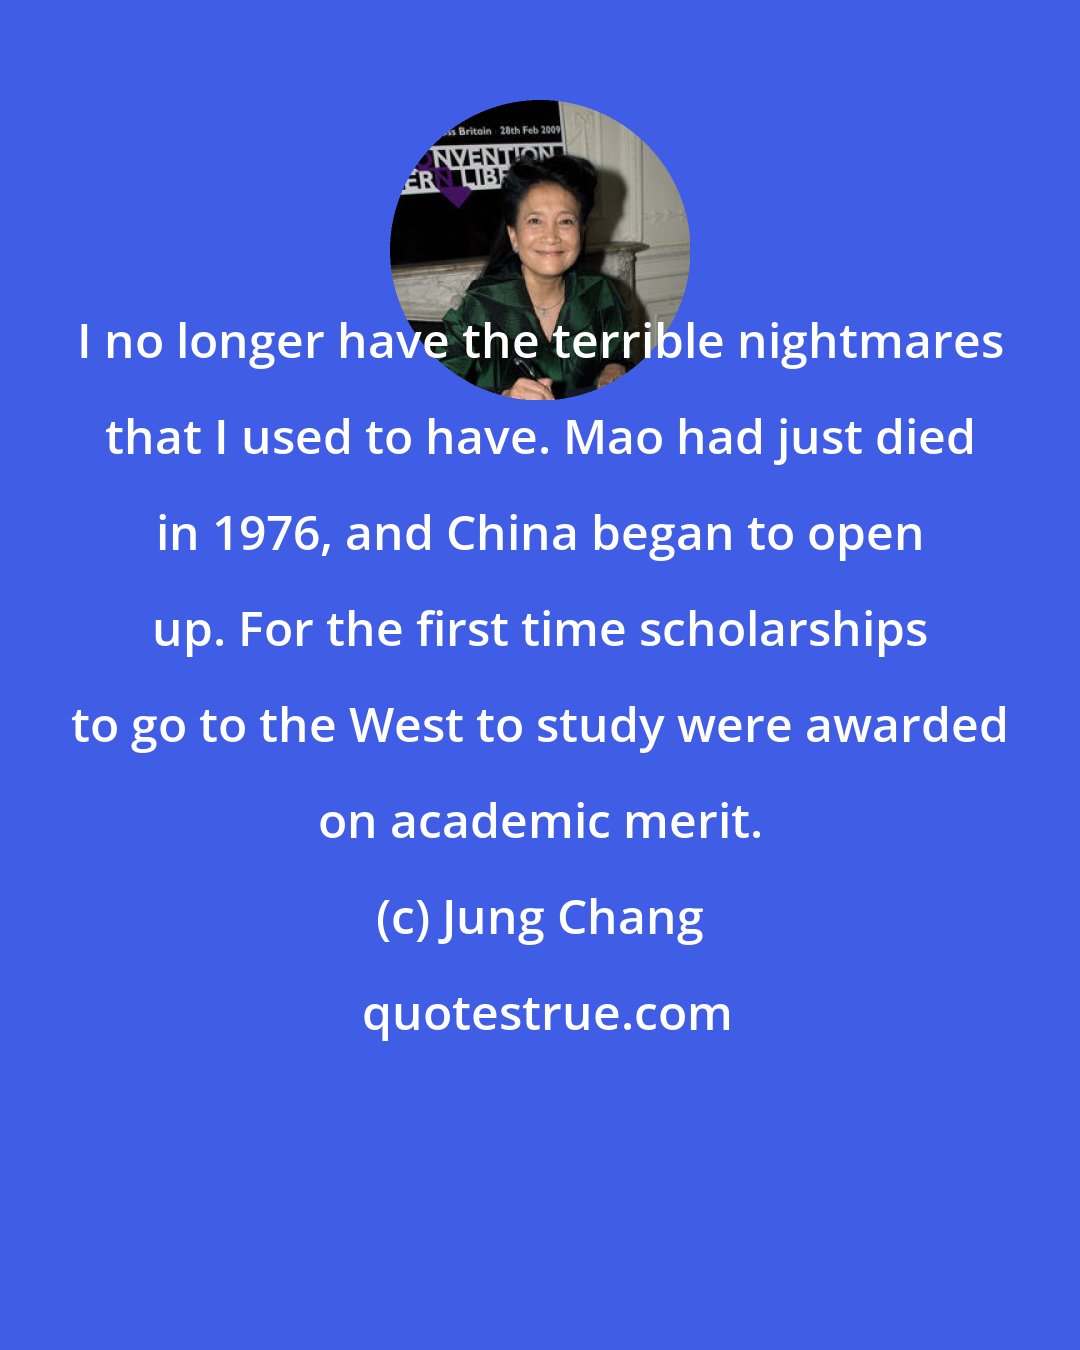 Jung Chang: I no longer have the terrible nightmares that I used to have. Mao had just died in 1976, and China began to open up. For the first time scholarships to go to the West to study were awarded on academic merit.